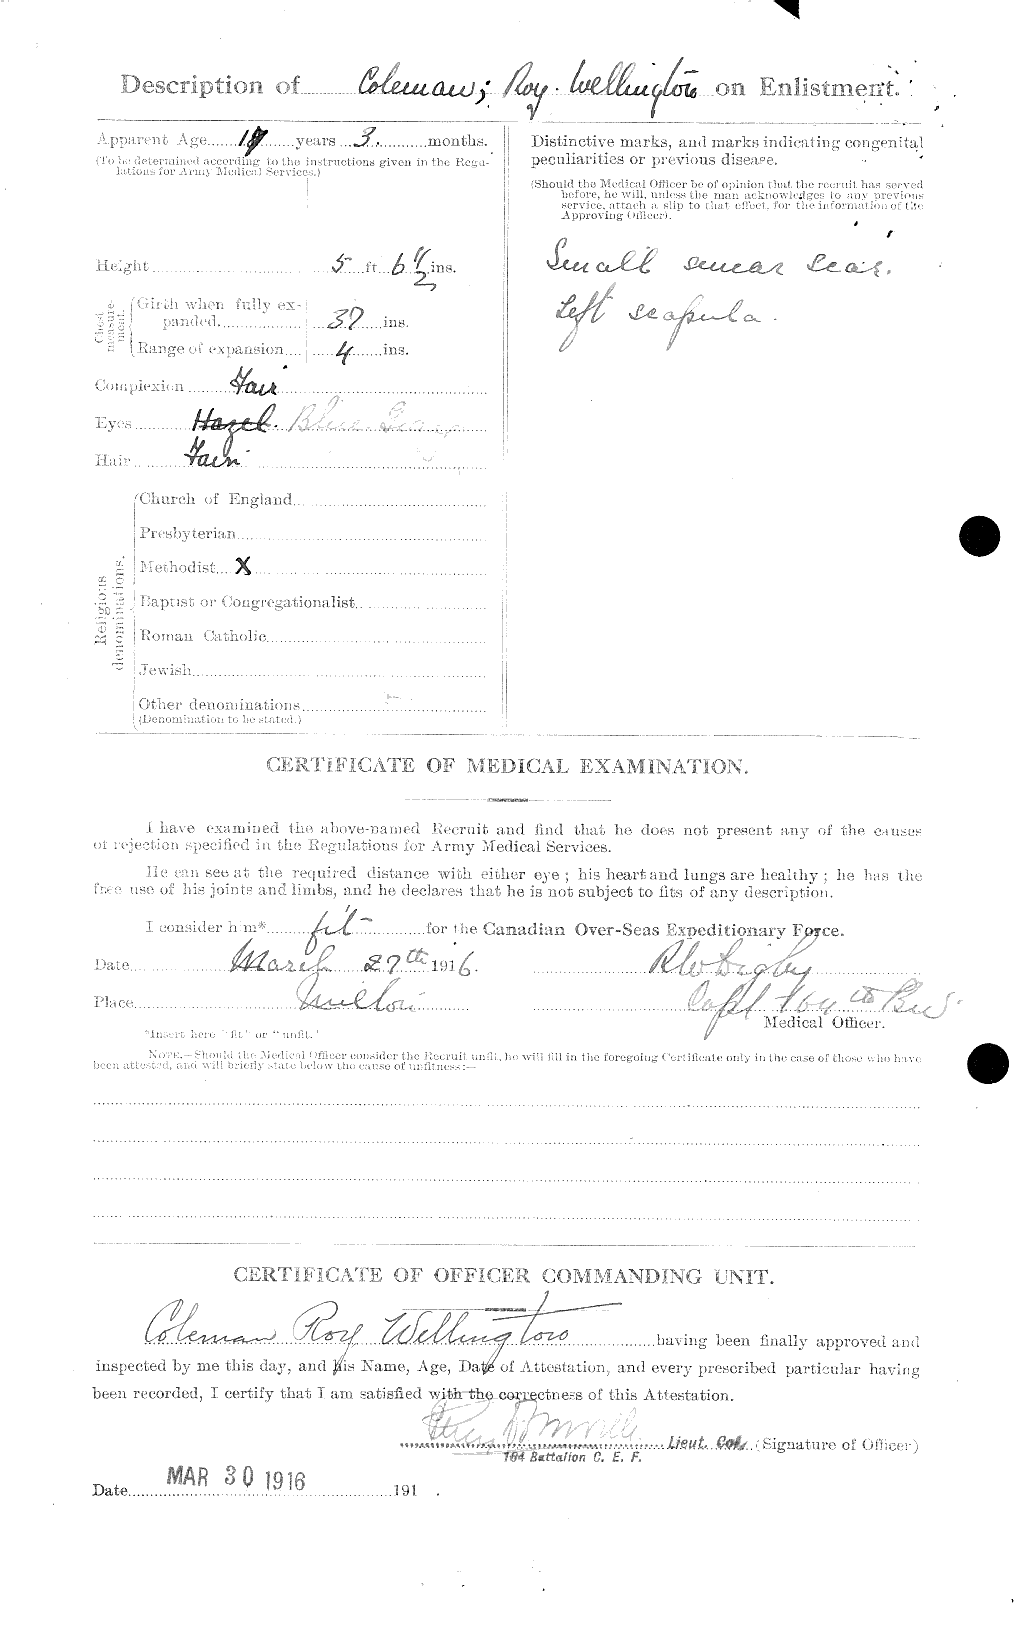 Personnel Records of the First World War - CEF 028264b